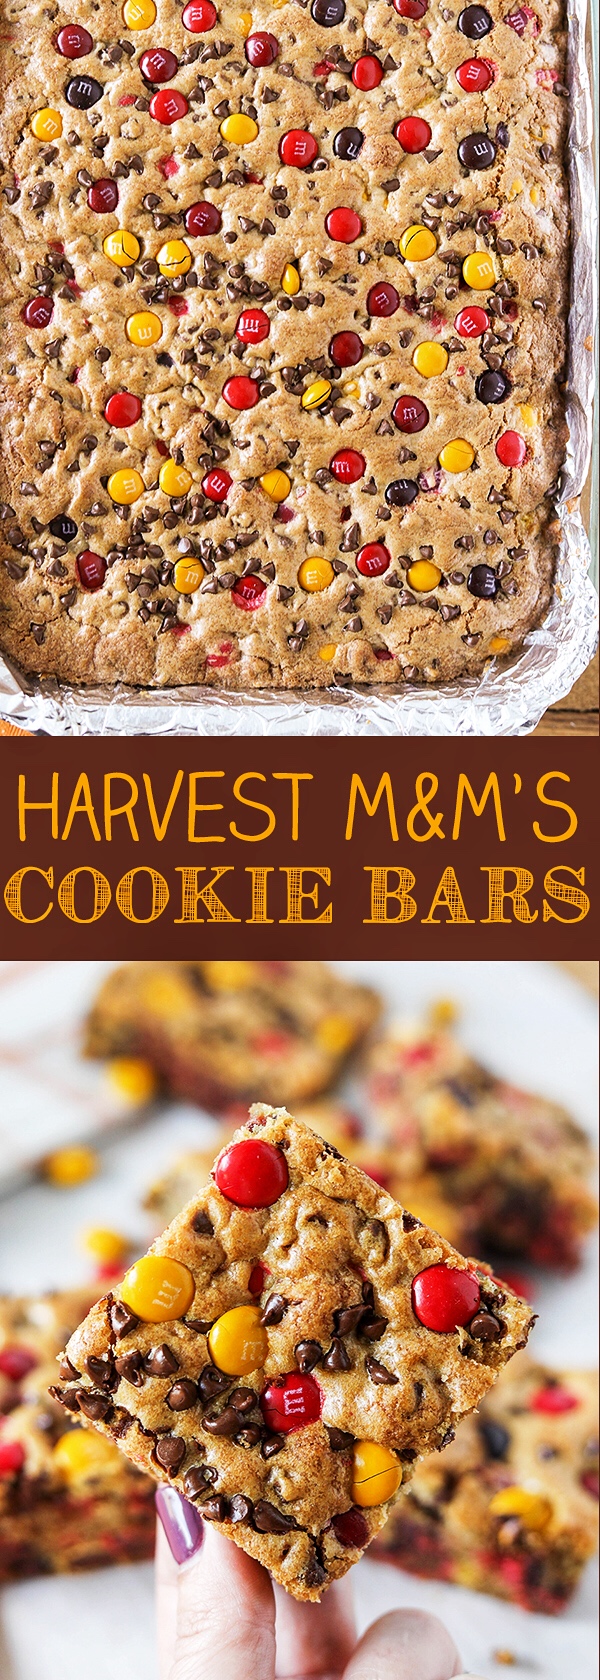 Harvest M&M's Cookie Bars for Halloween or Thanksgiving